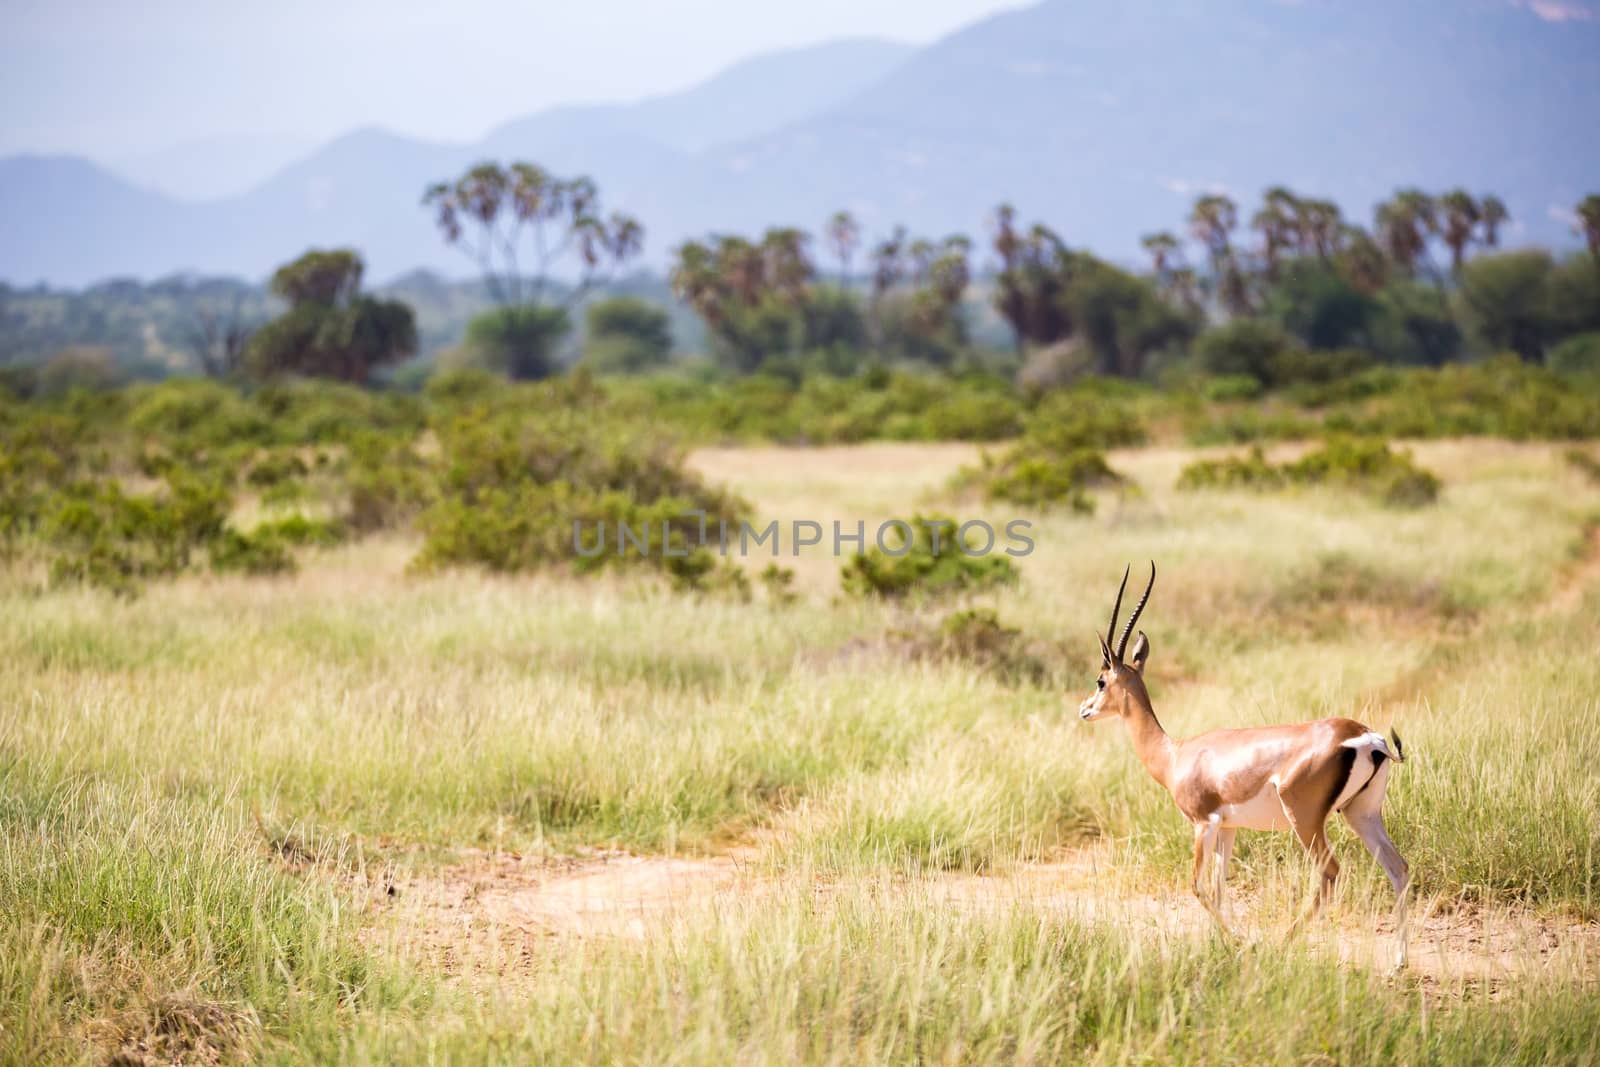 The antelopes in the grass landscape of Kenya